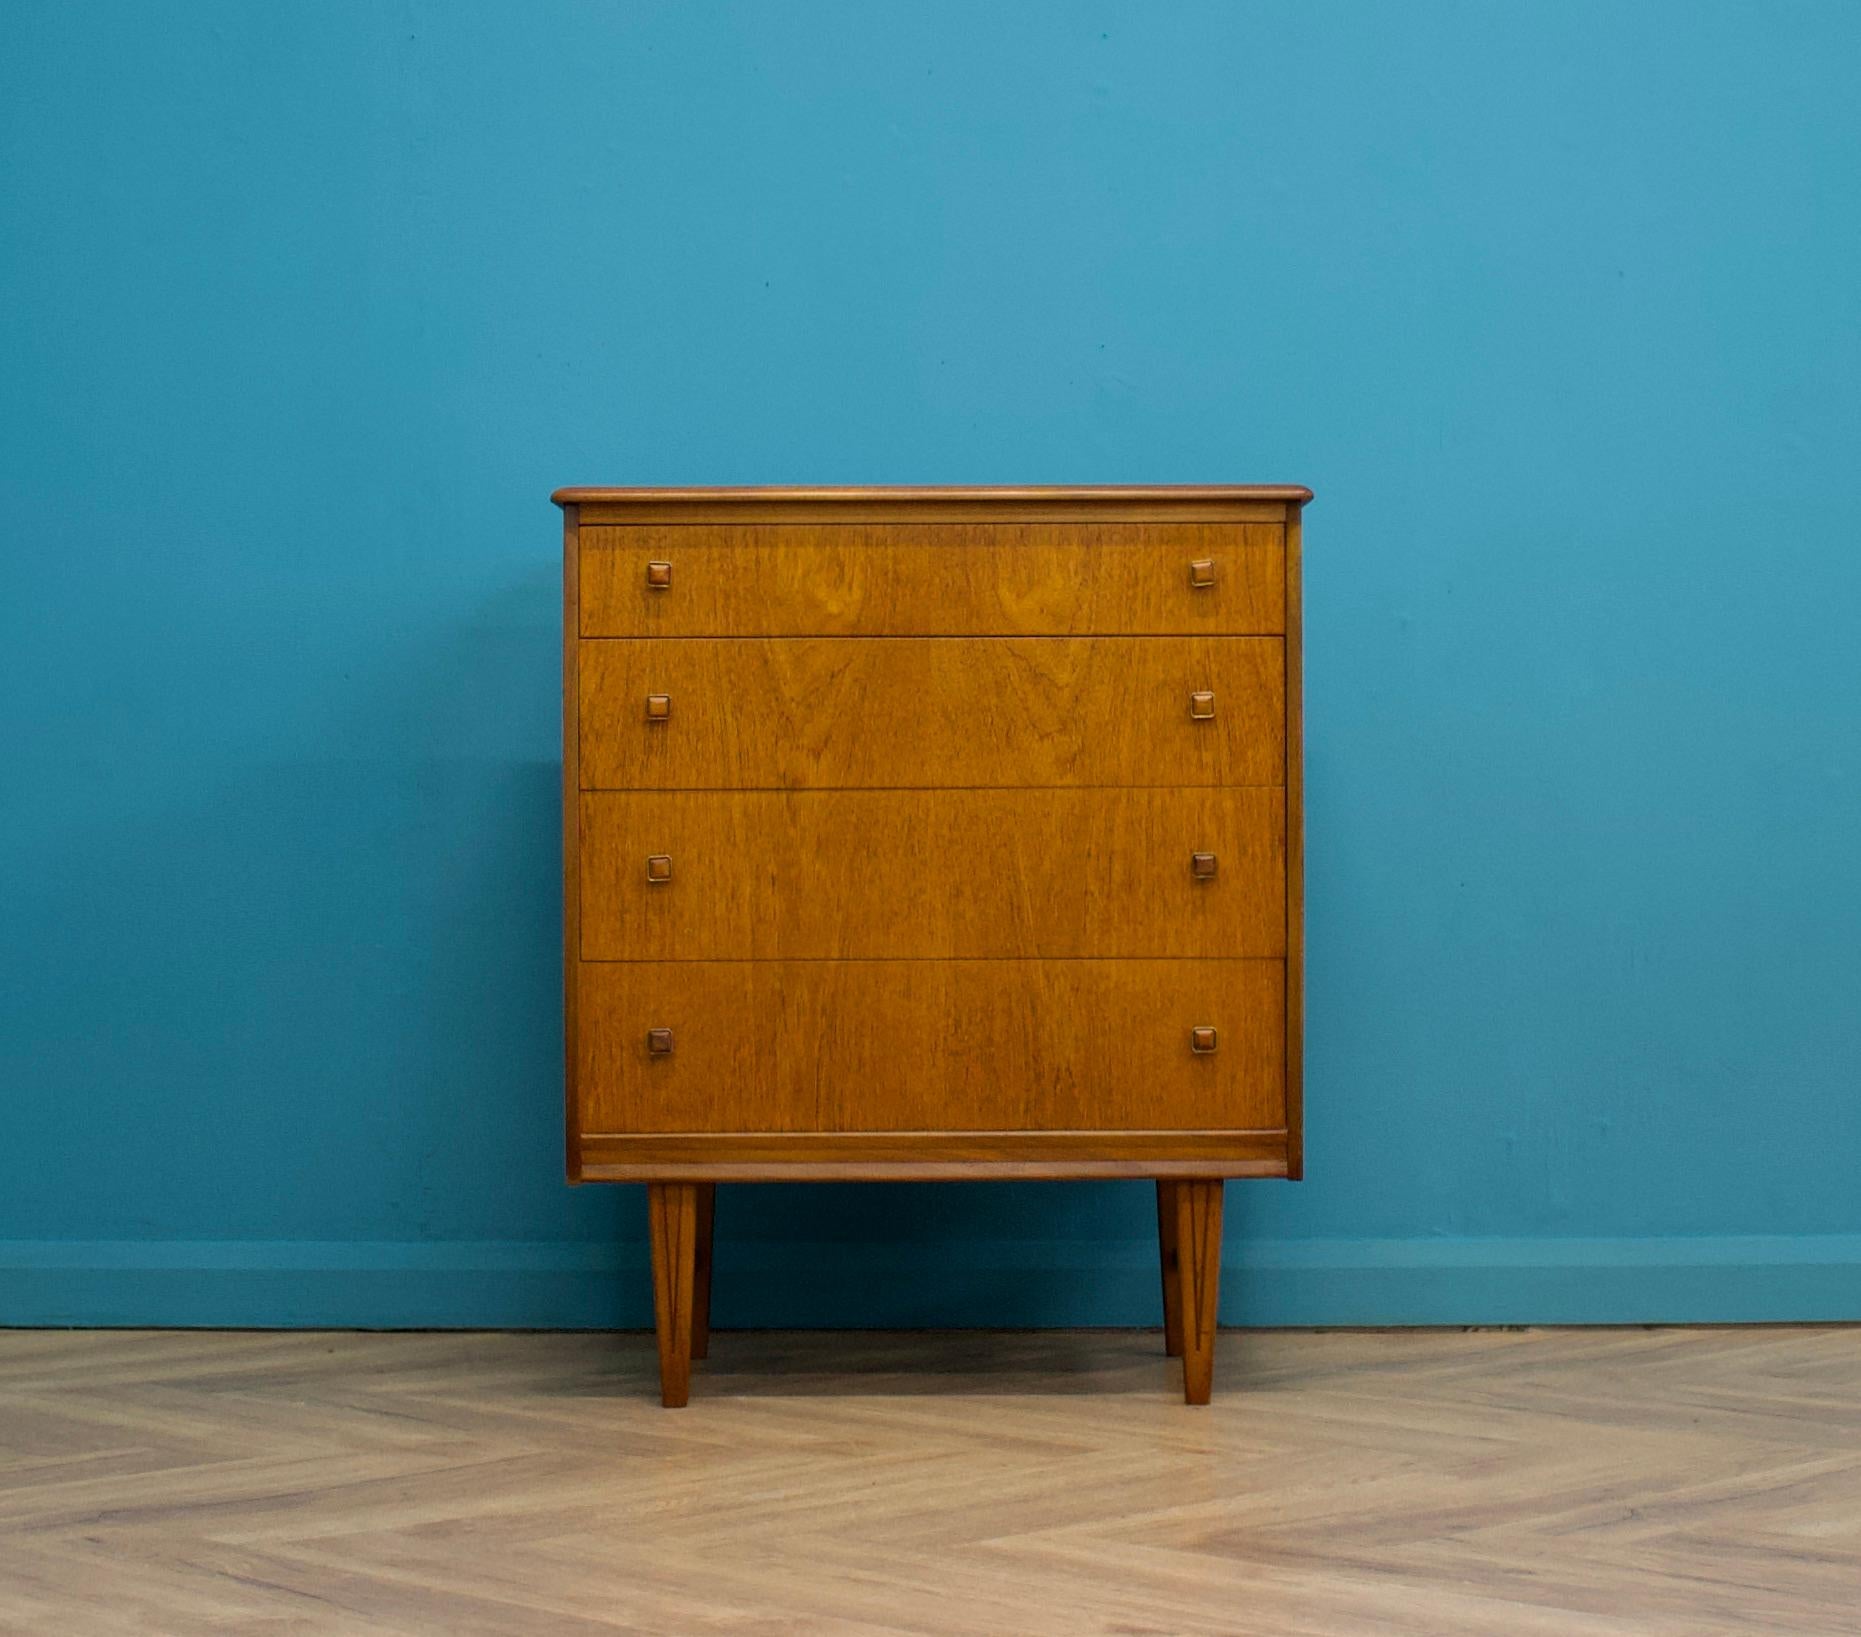 A teak chest of drawers from Homeworthy
Featuring 4 drawers